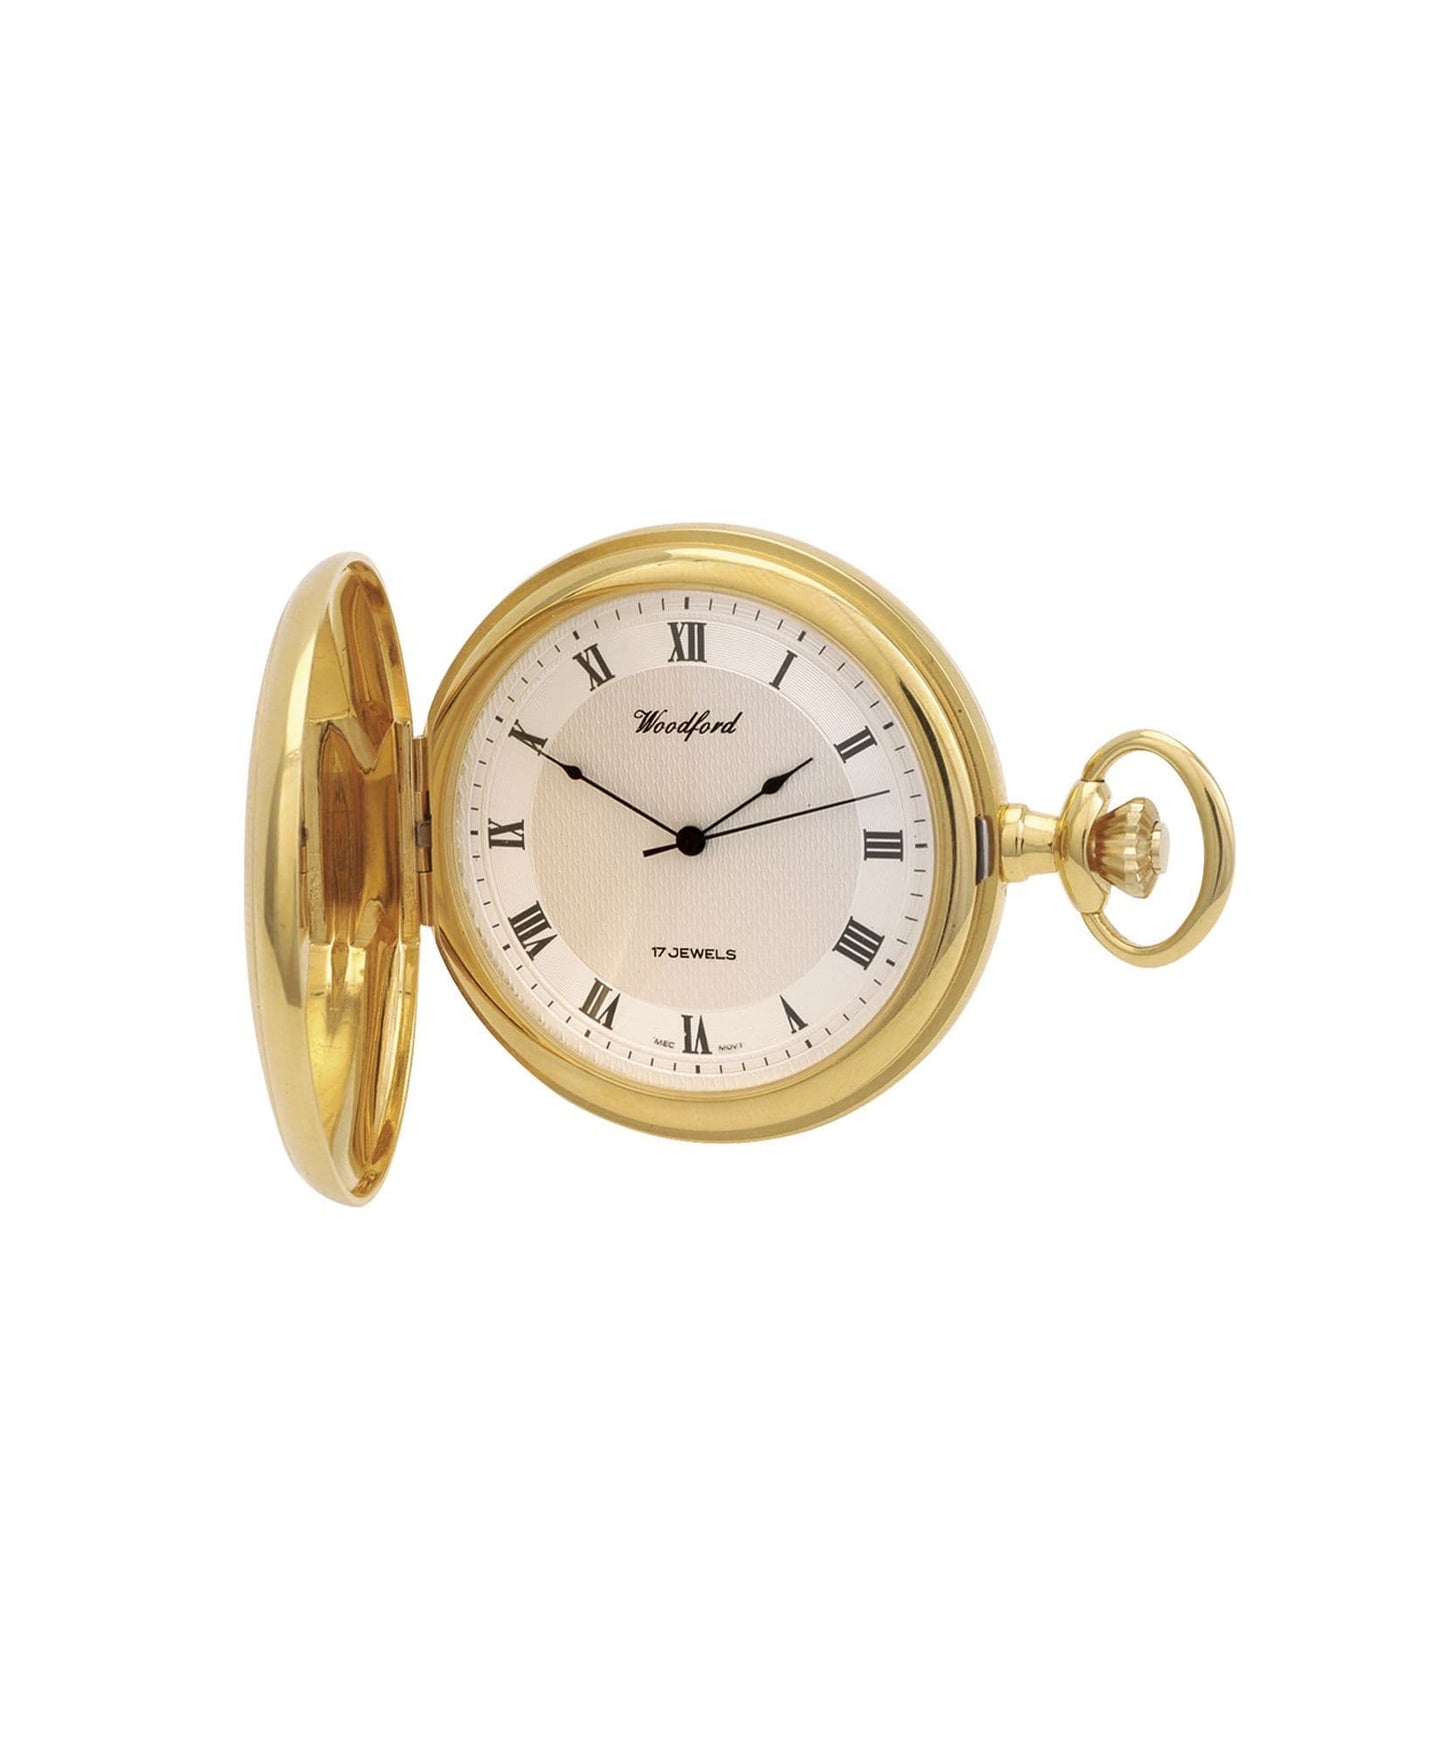 Mechanical Gold Plated Patterned Pocket Watch With Chain